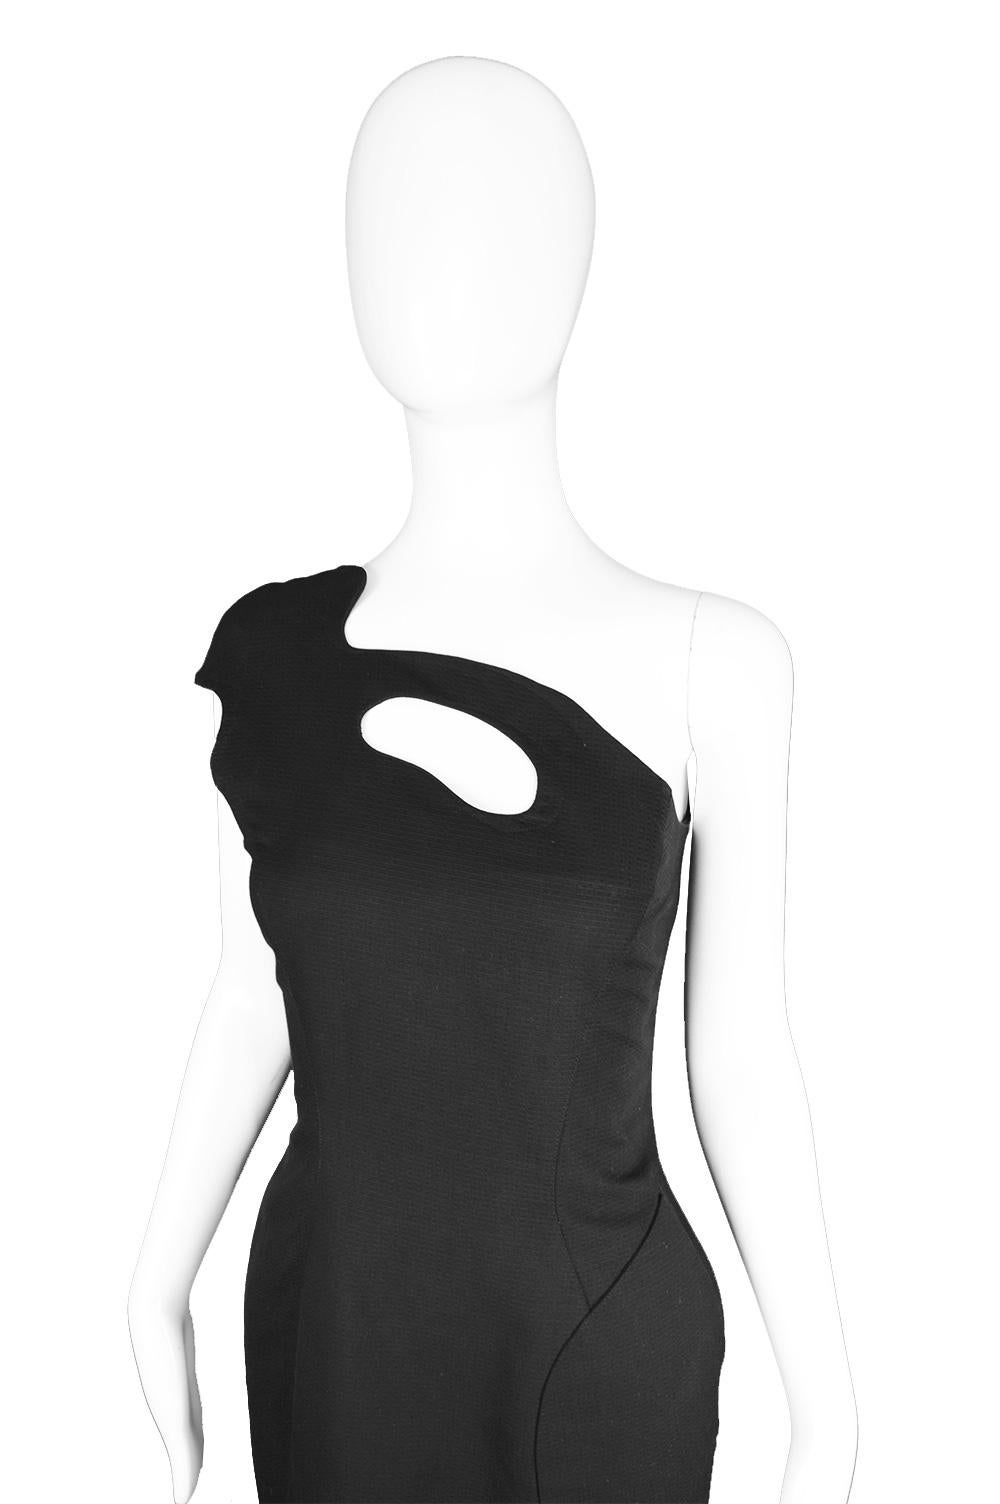 Thierry Mugler Sculptural One Shoulder Vintage Black Cotton Party Dress, 1980s In Excellent Condition For Sale In Doncaster, South Yorkshire